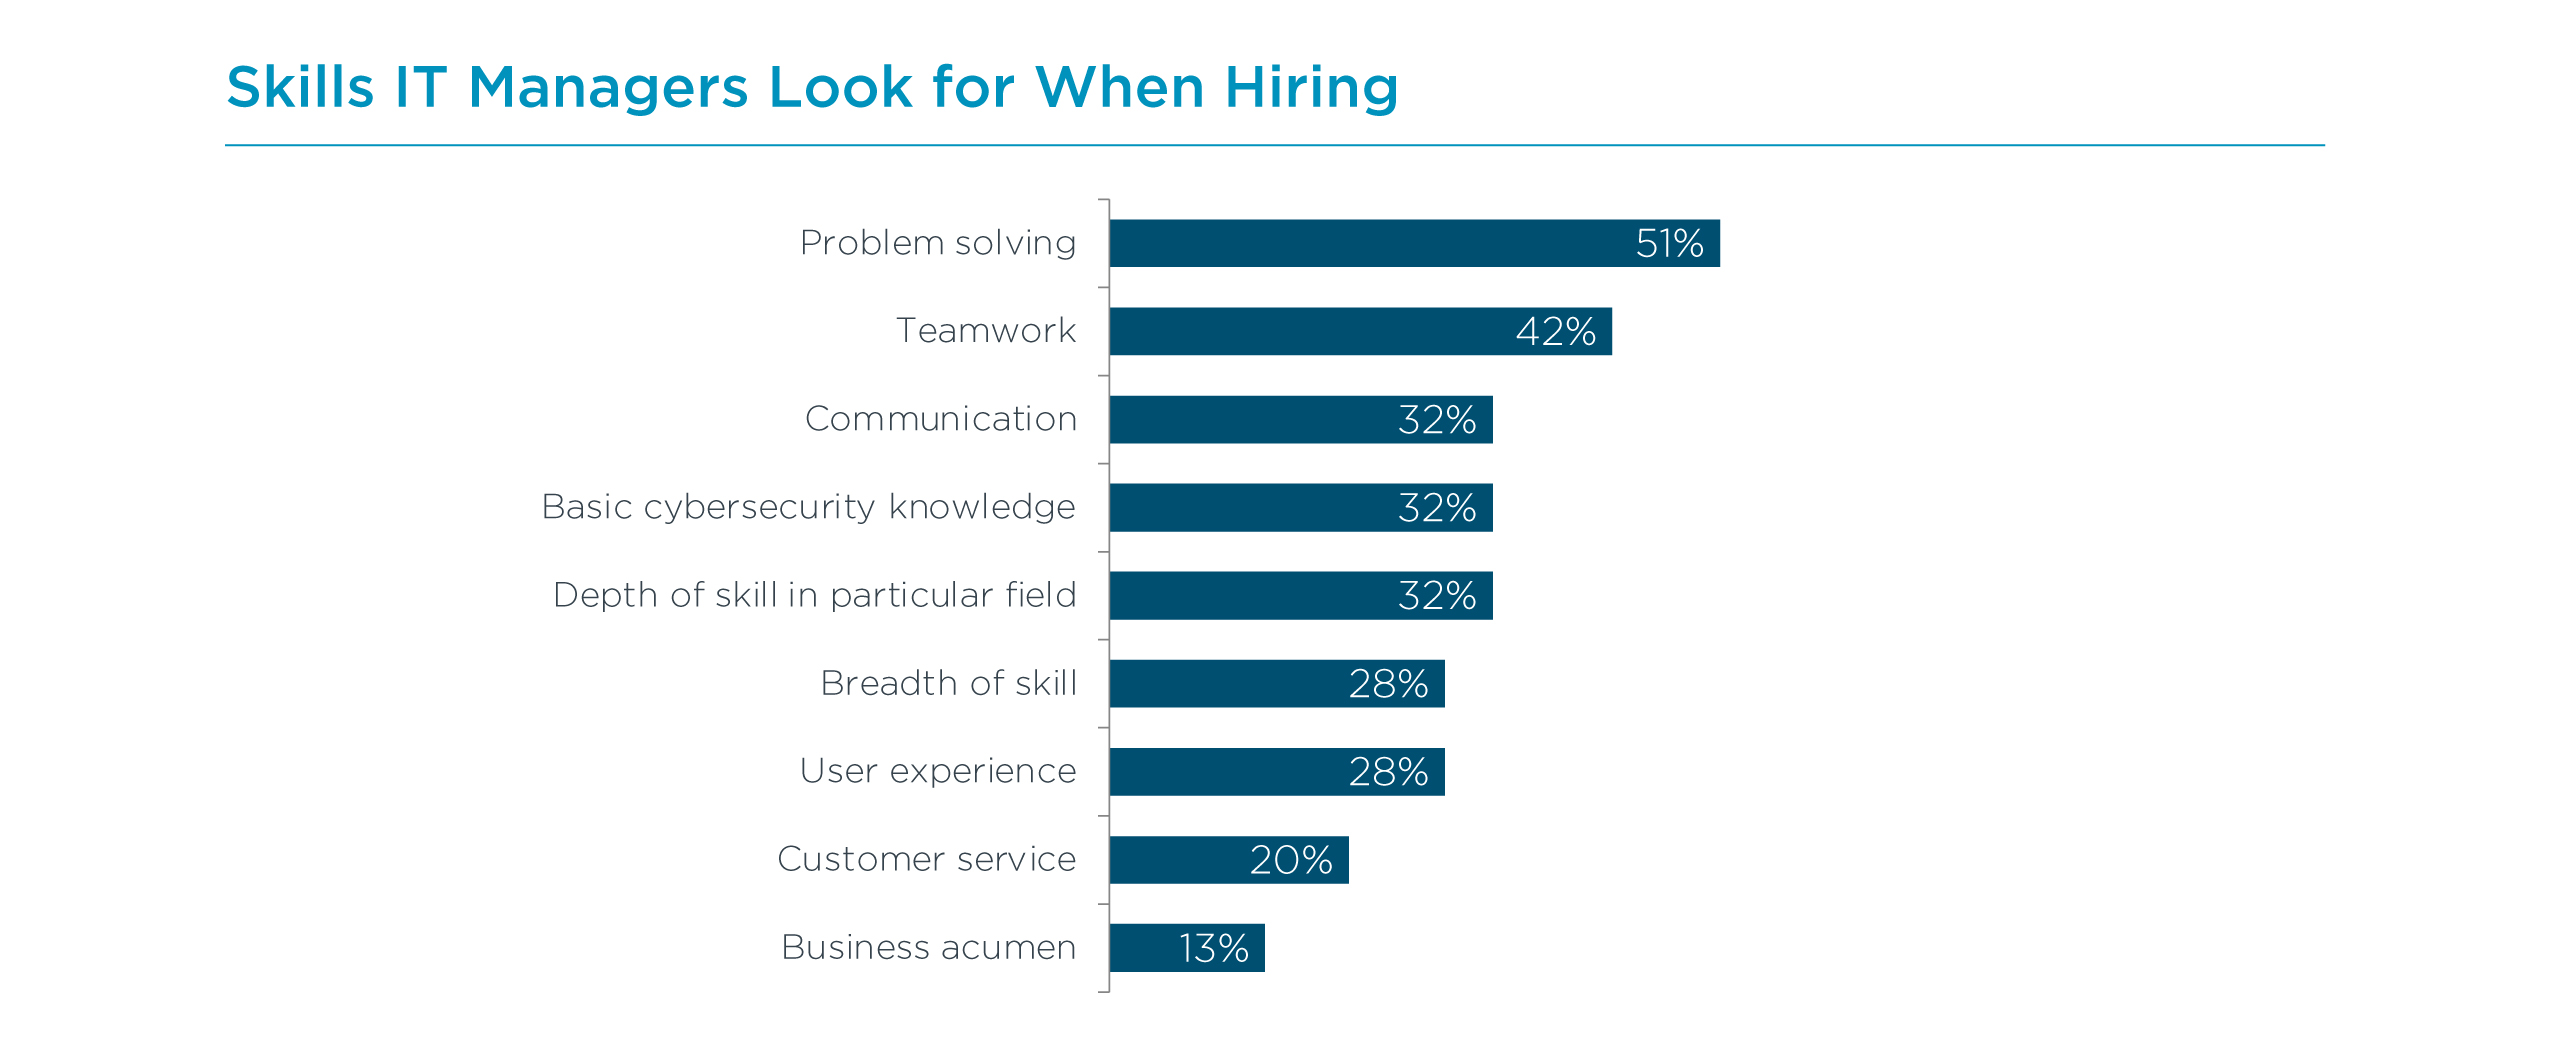 Skills IT Managers Look for When Hiring